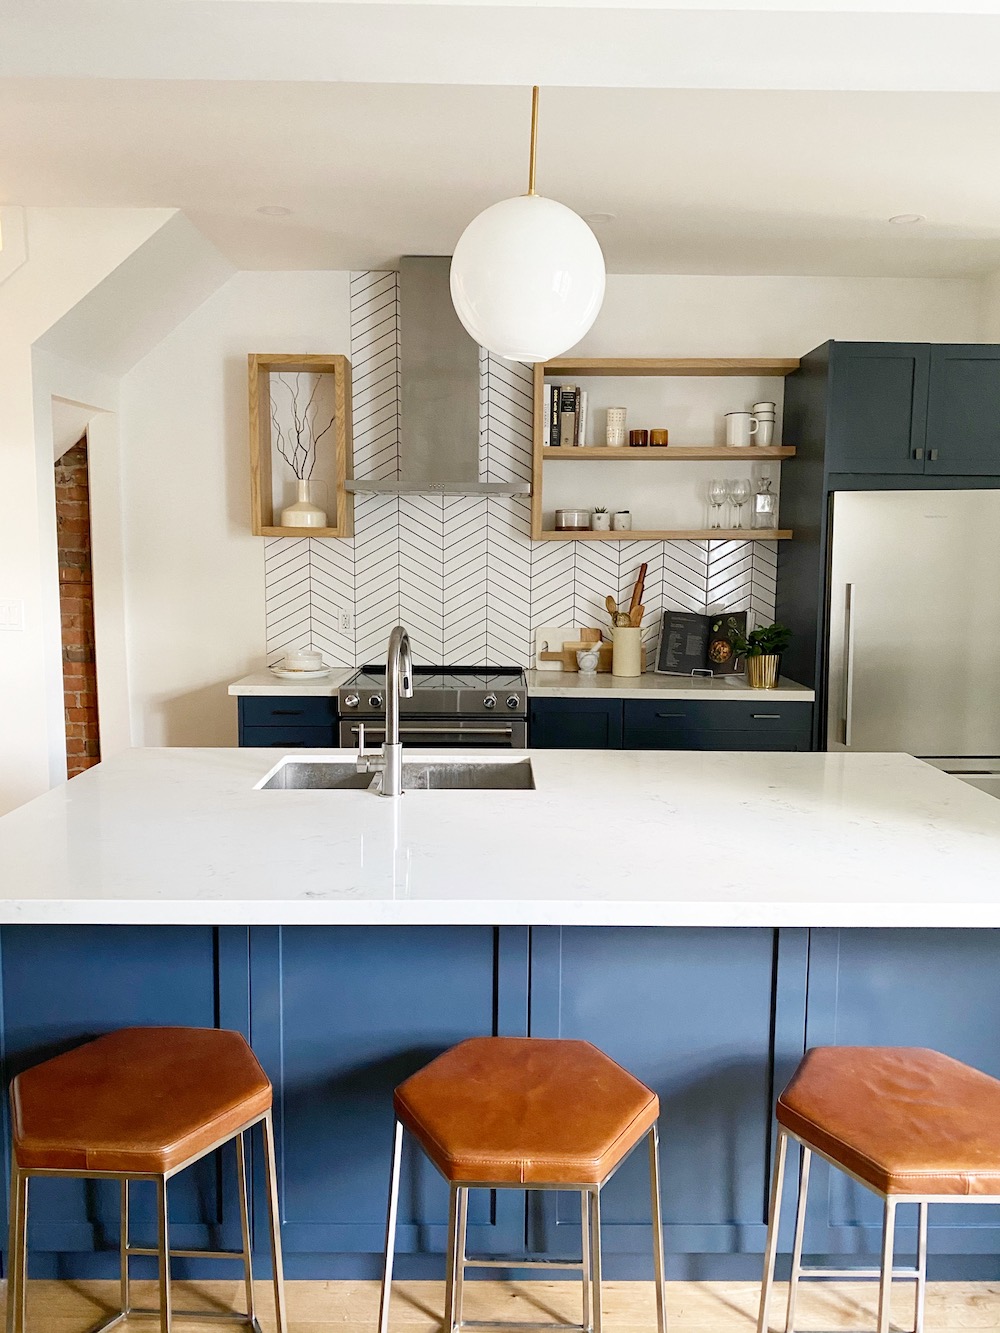 Modern kitchen designed and styled by The Property Stylist Inc. with large blue island with a white quartz countertop and undermounted kitchen sink, dark blue cabinets, white glass globe pendant light, and white herringbone tile backsplash